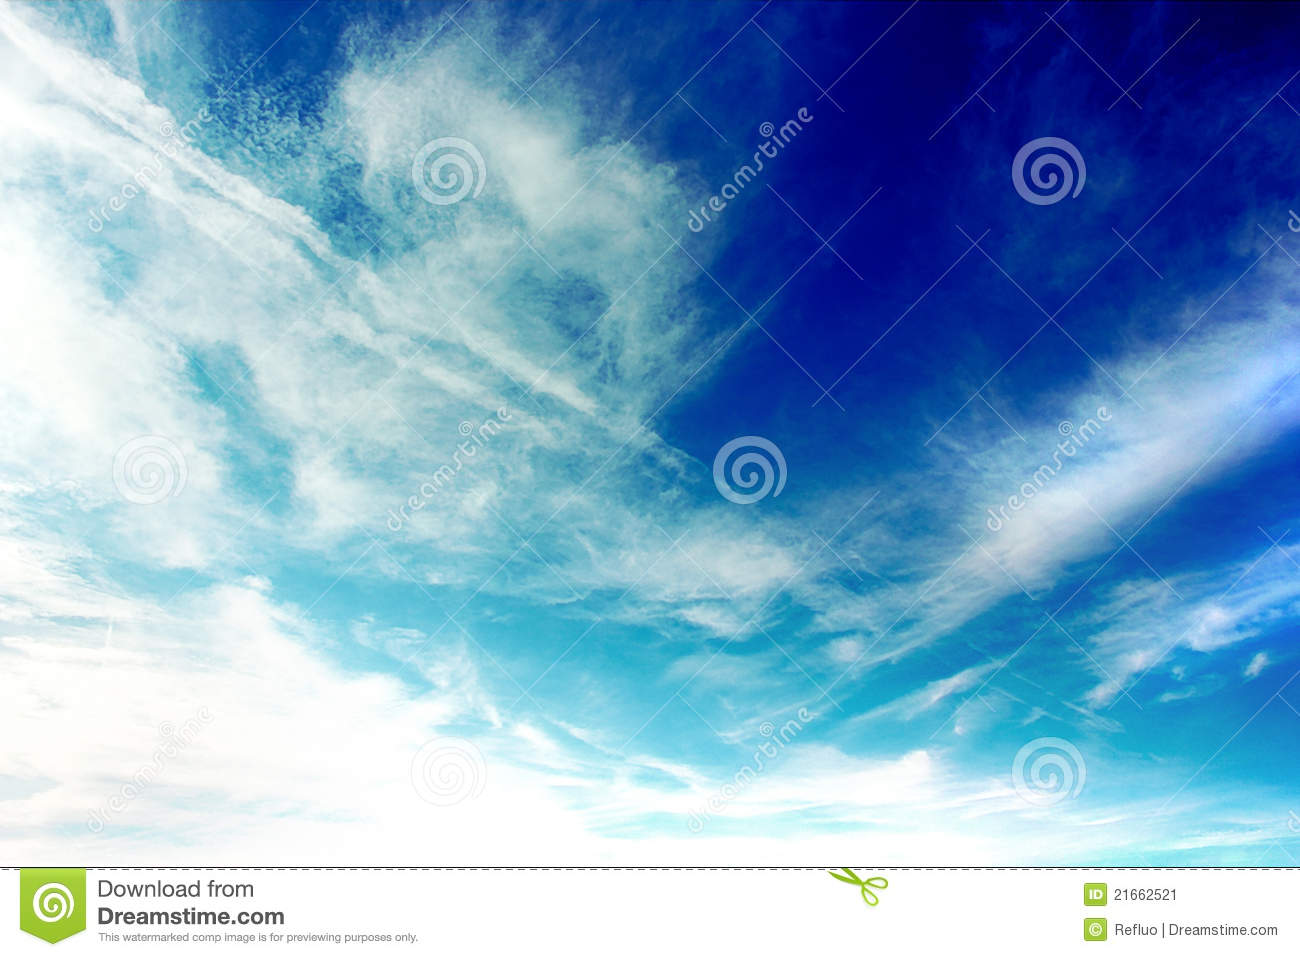 Blue Sky With Different Types Of Clouds 